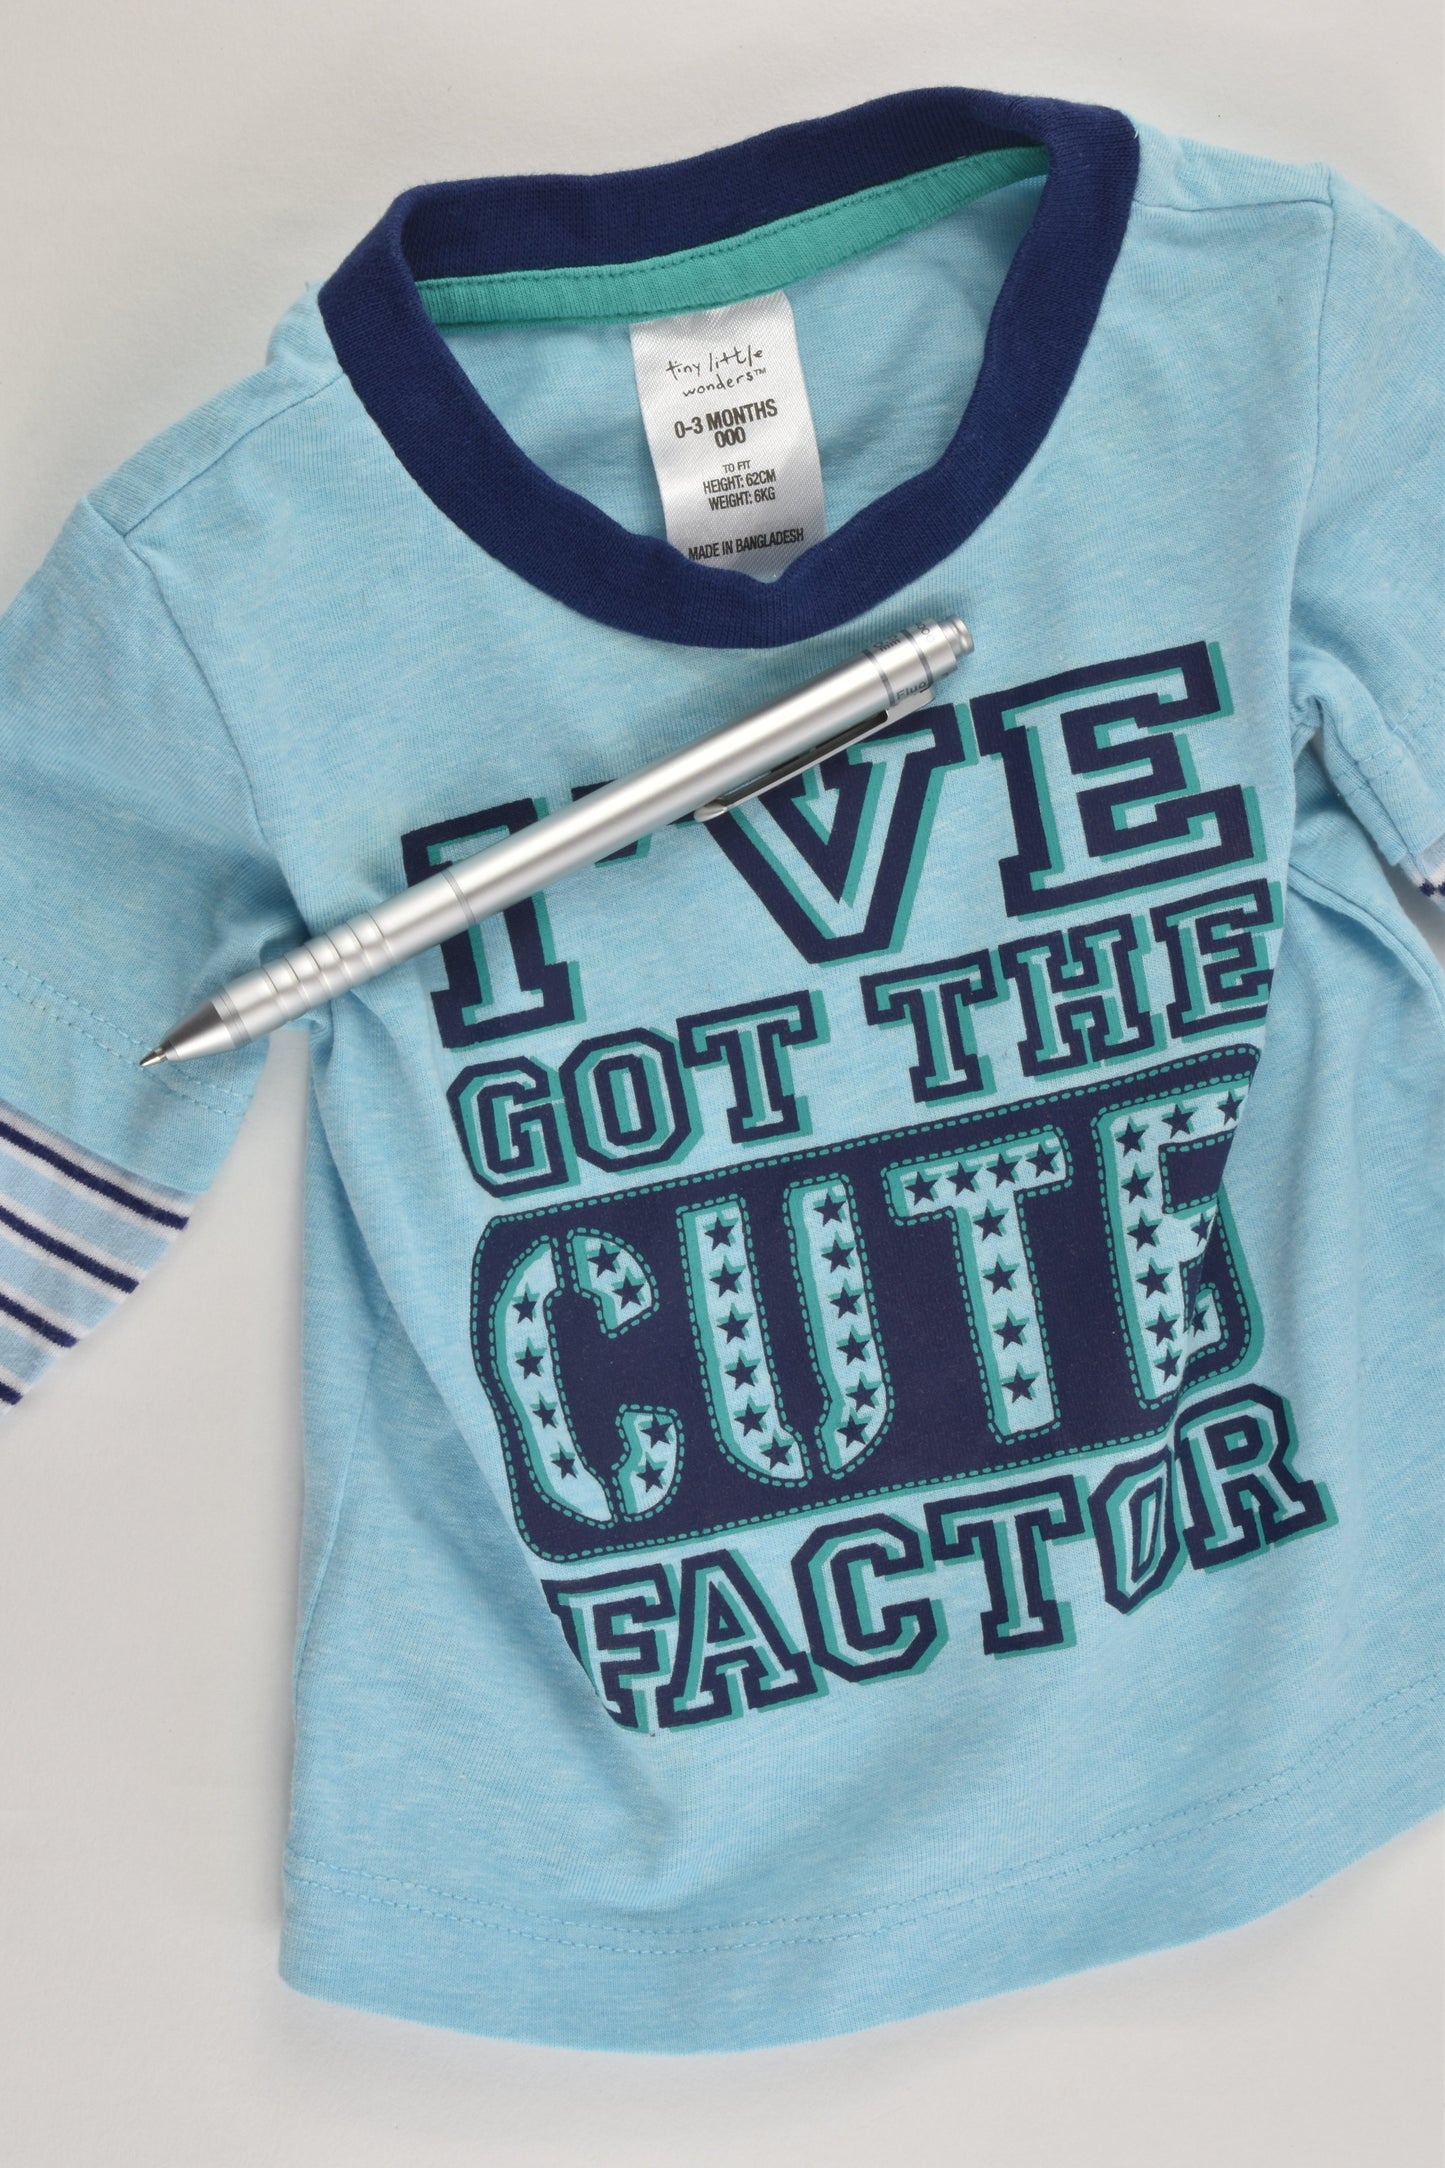 Tiny Little Wonders Size 000 (0-3 months) 'I've Got The Cute Factor' Top